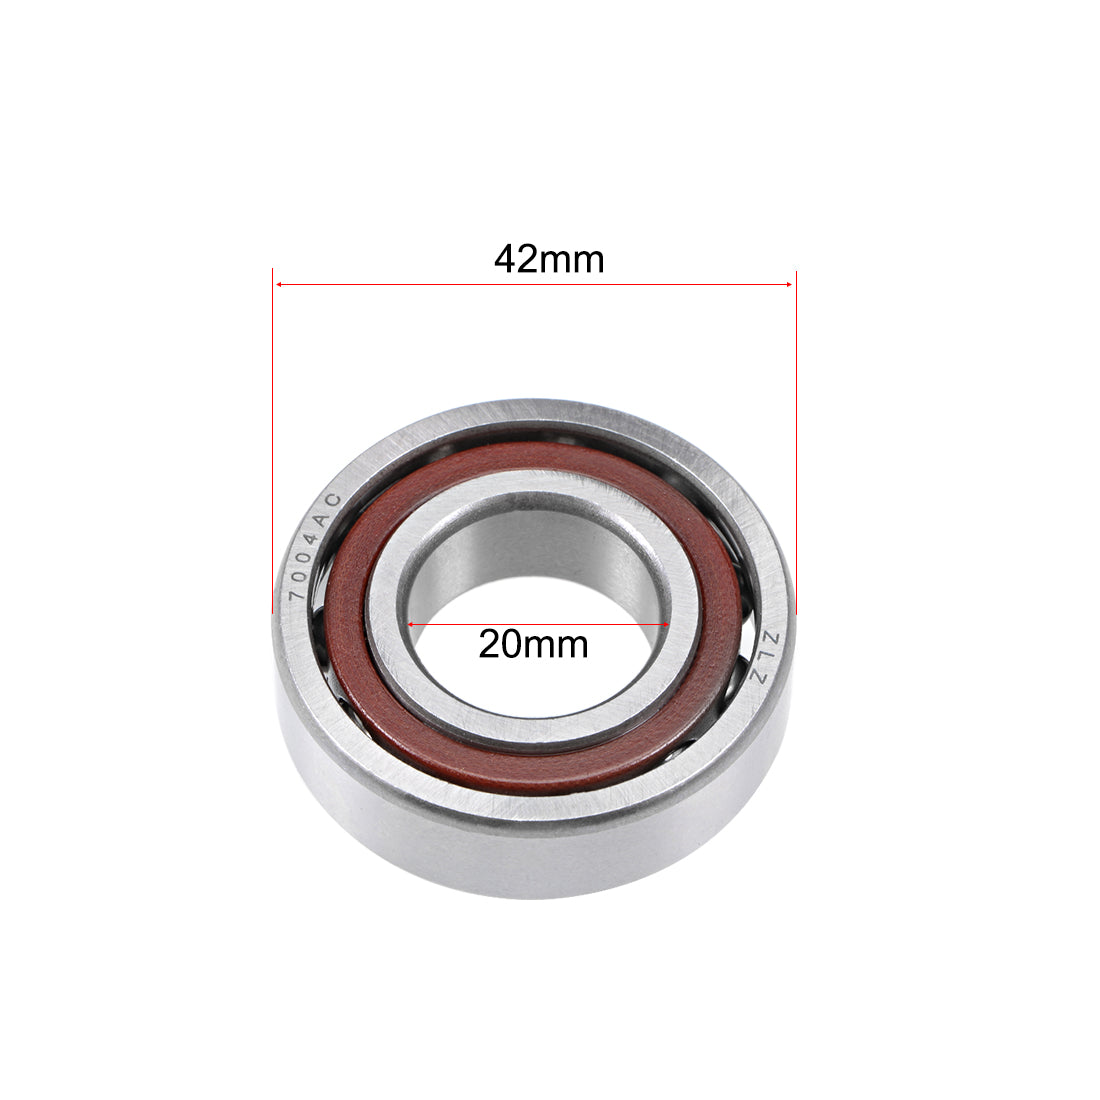 Uxcell Uxcell 7000AC Angular Contact Ball Bearing 10x26x8mm, Single Row, Open, 25° Contact Angle